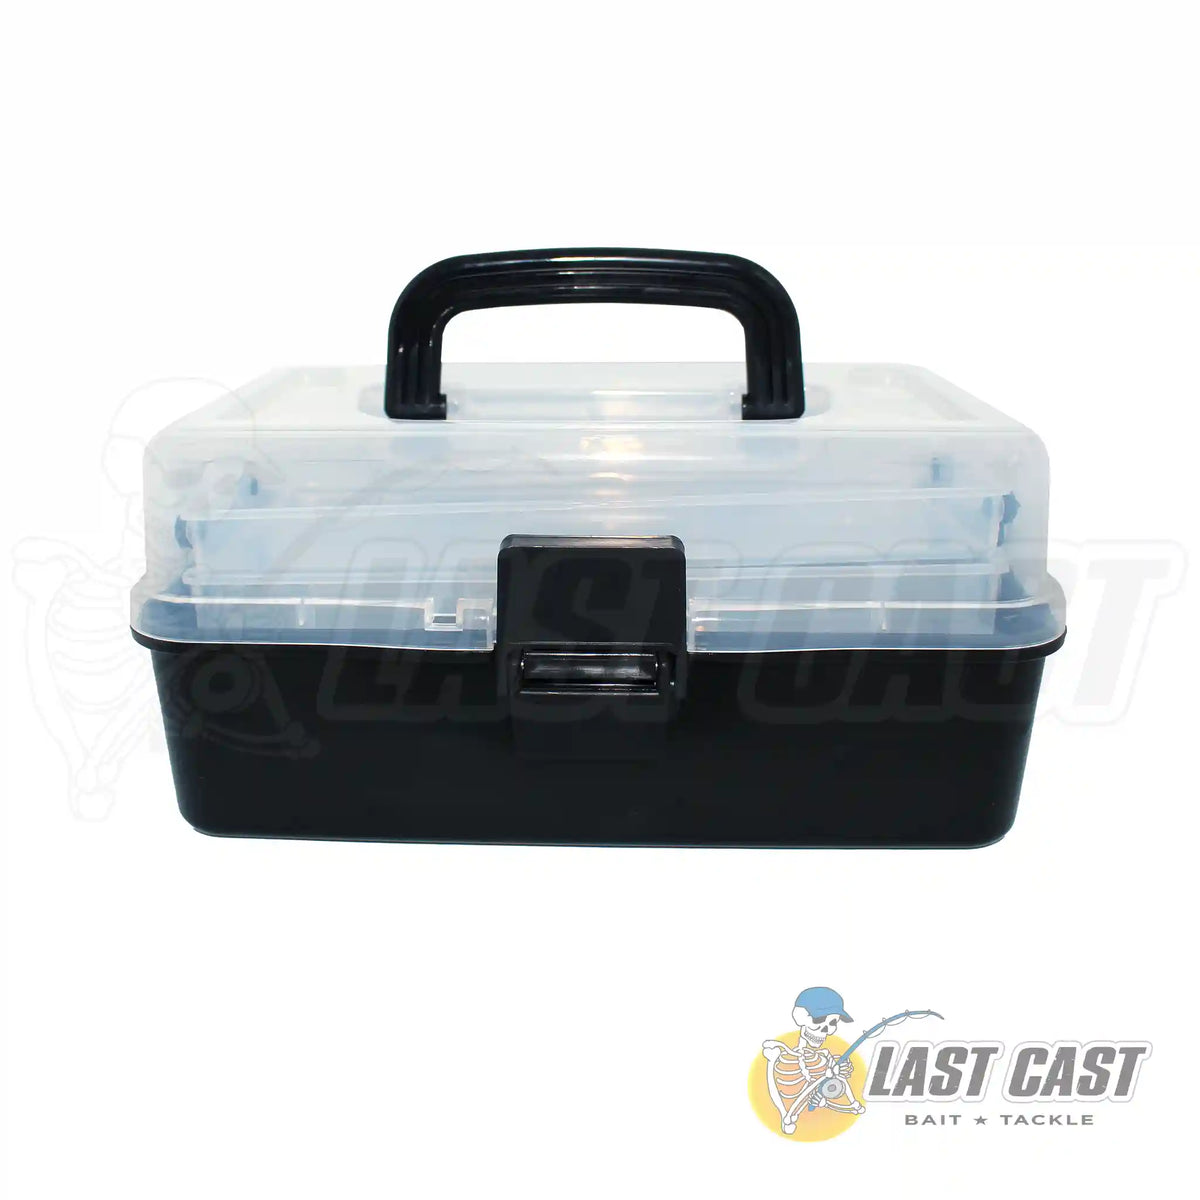 LAST CAST 2 TRAY TACKLE BOX — Last Cast Bait and Tackle